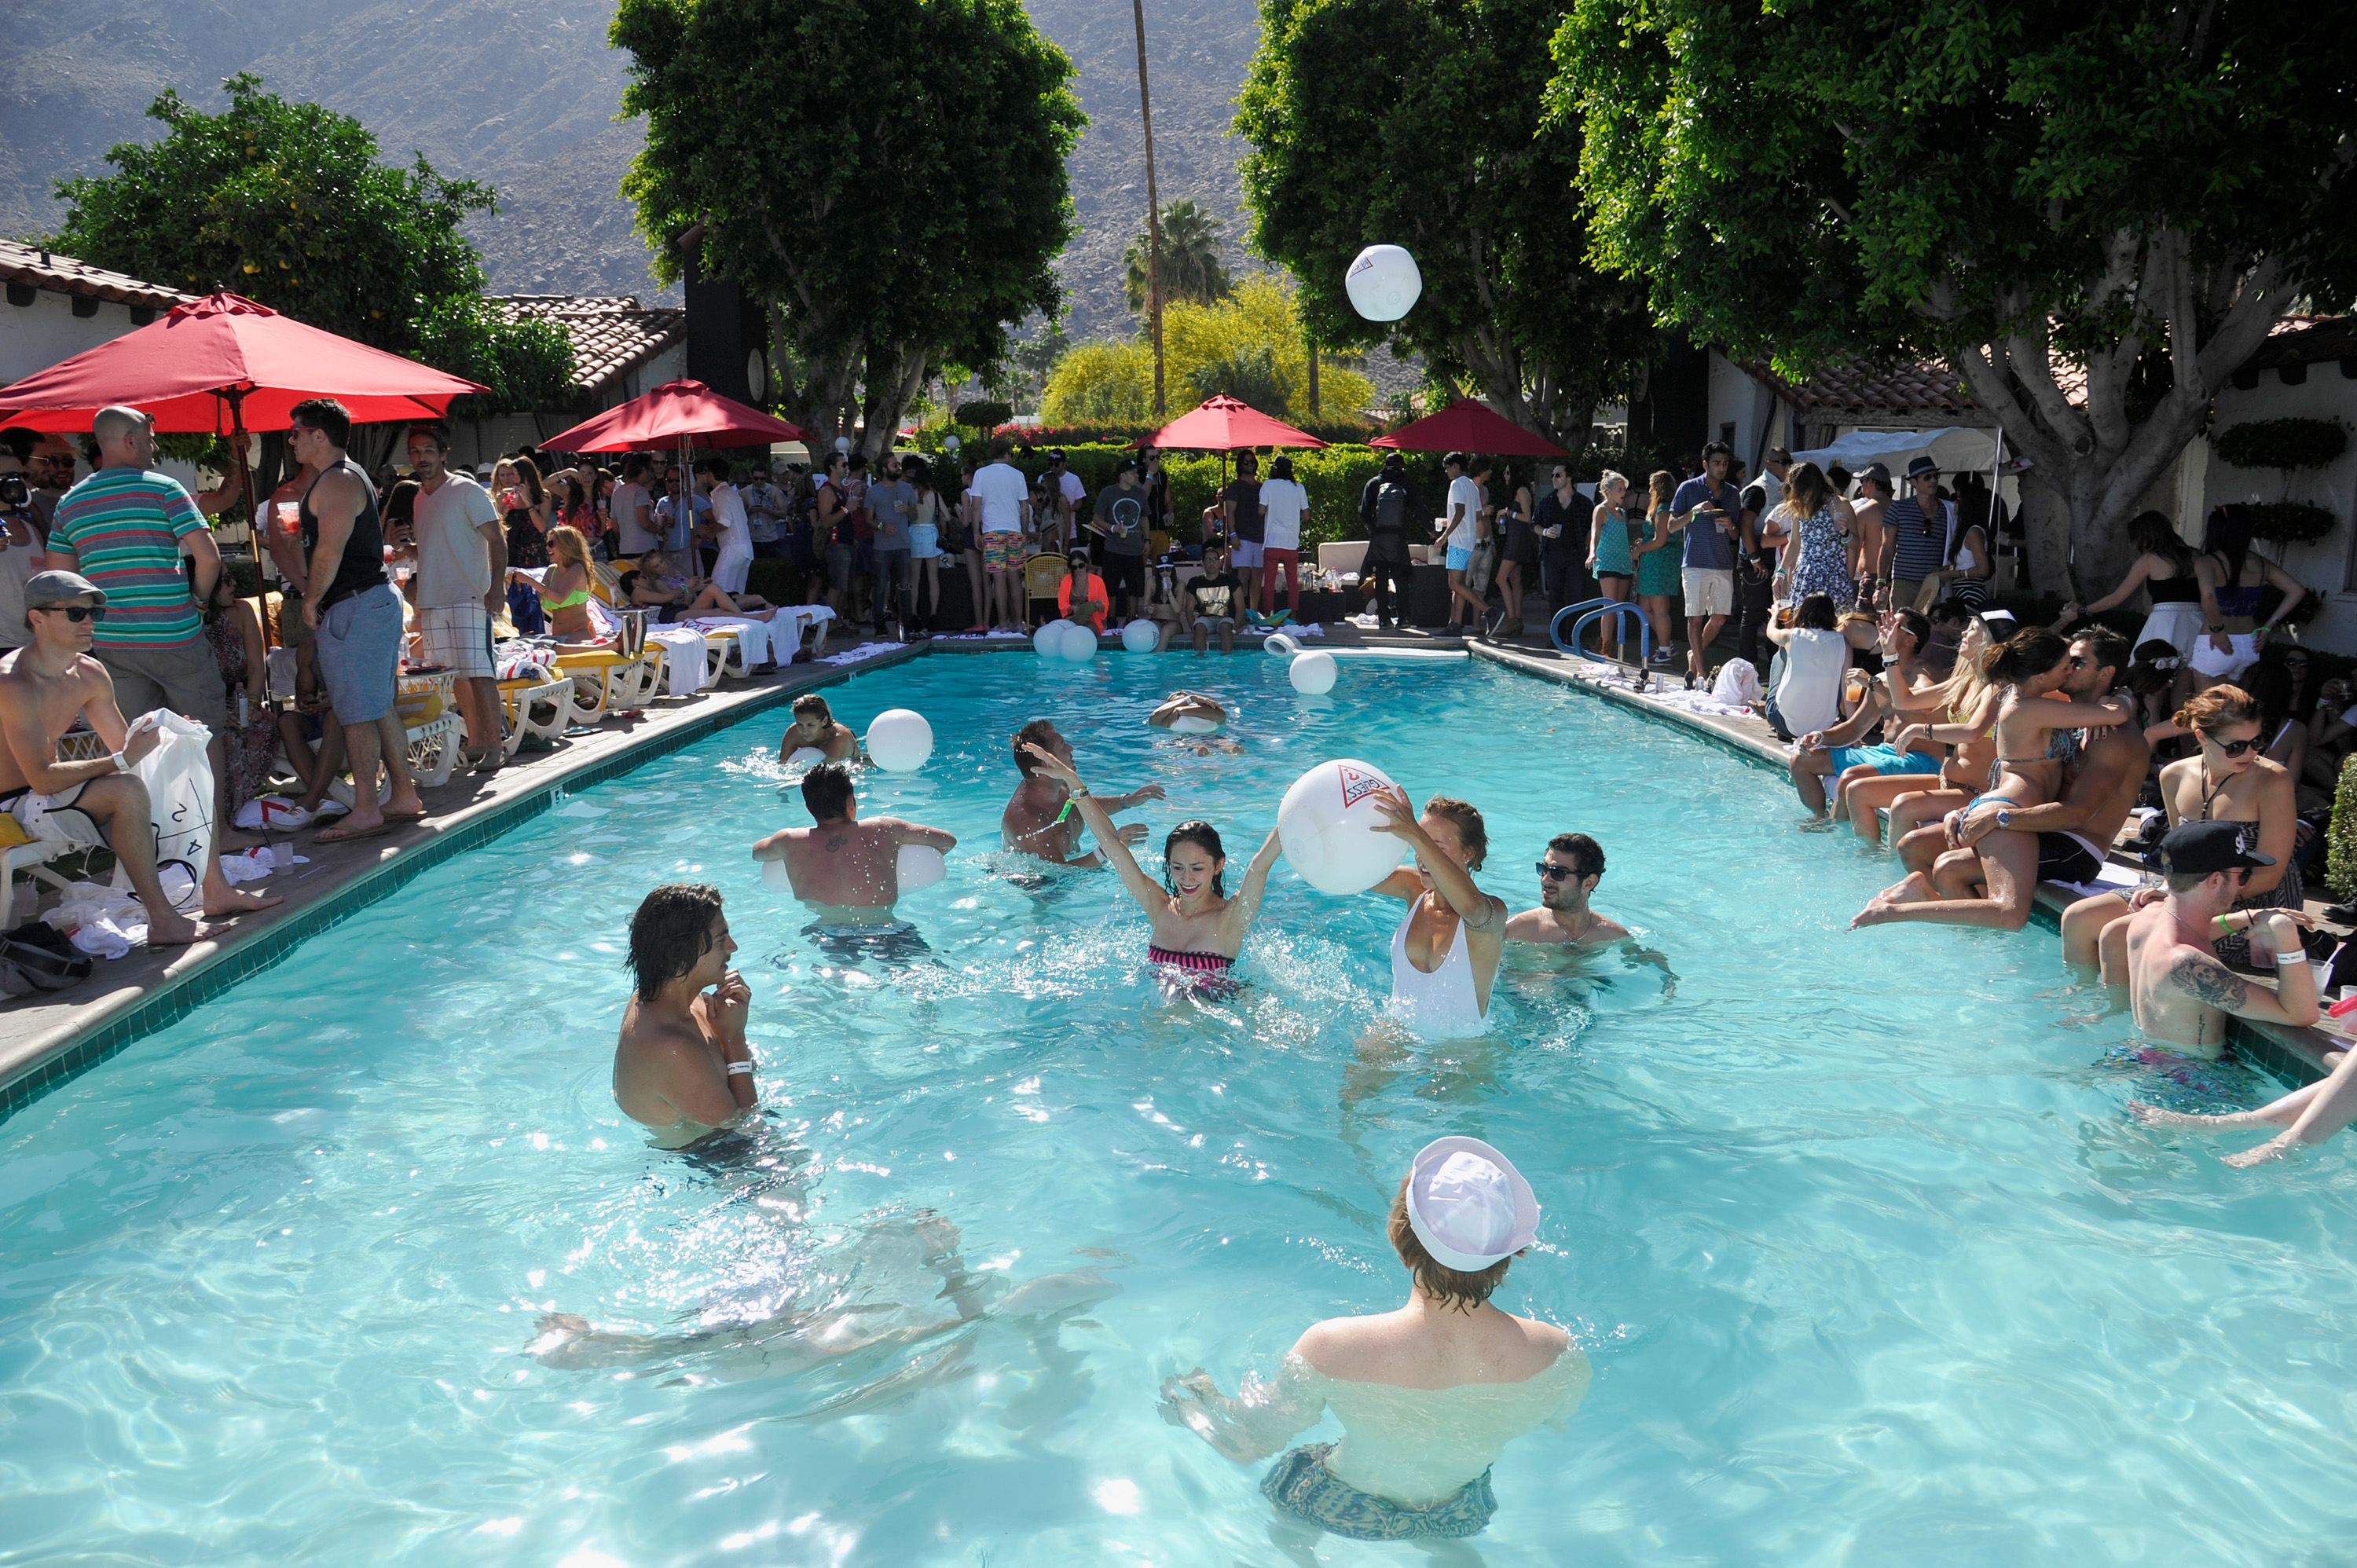 PALM SPRINGS, CA - APRIL 14: A general view at the GUESS Hotel pool party at the Viceroy Palm Springs on April 14, 2013 in Palm Springs, California. (Photo by John Sciulli/Getty Images for GUESS)